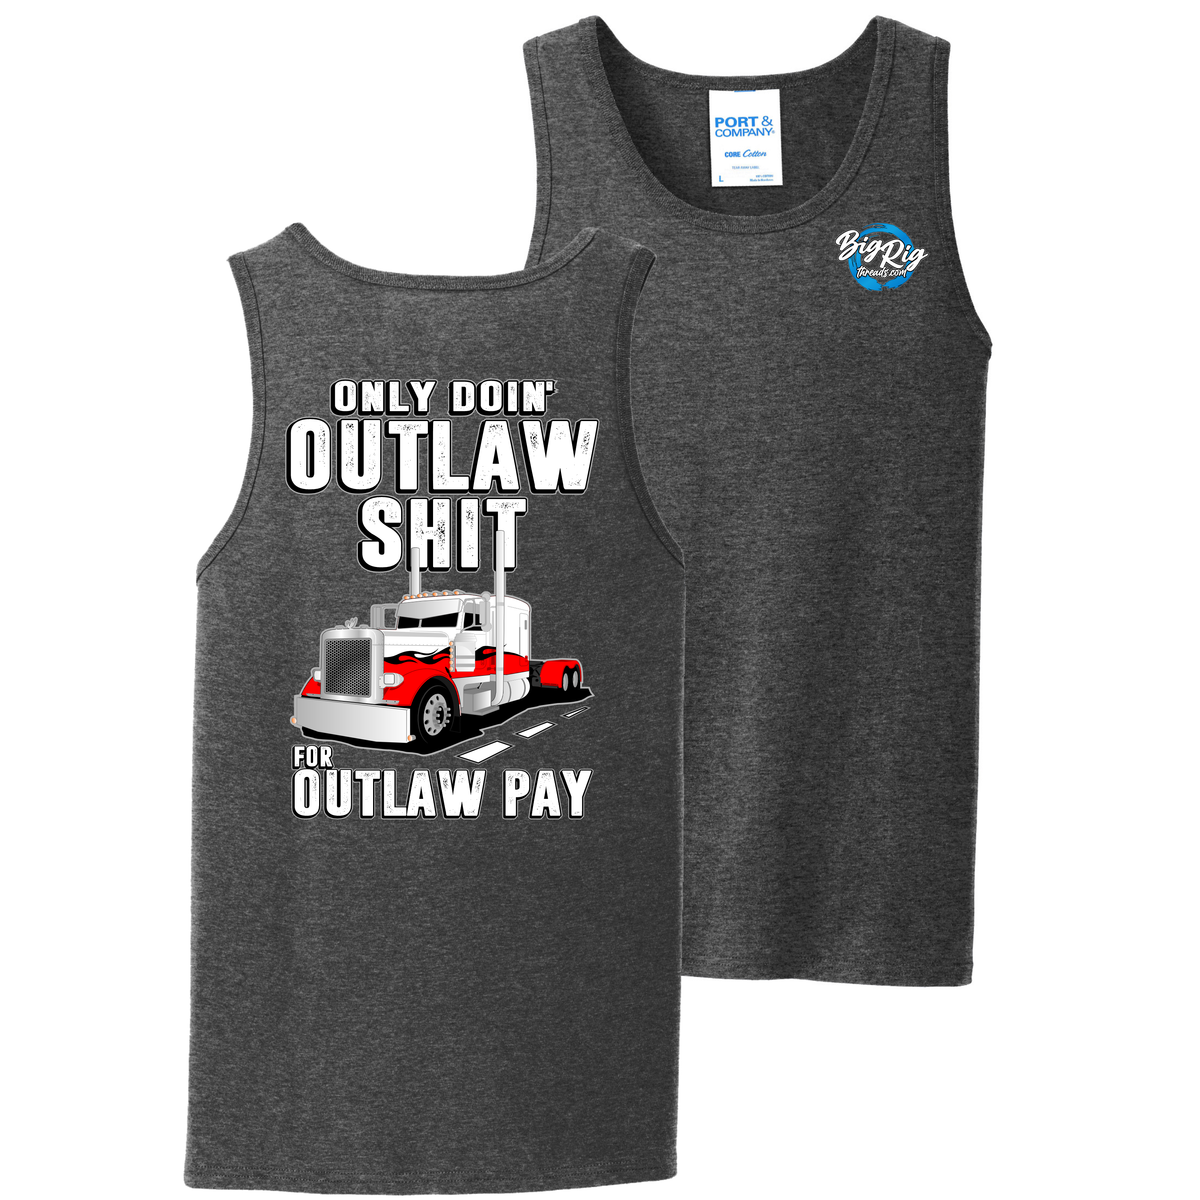 Only Doin' Outlaw Shit for Outlaw Pay - Tank Top - Peterbilt